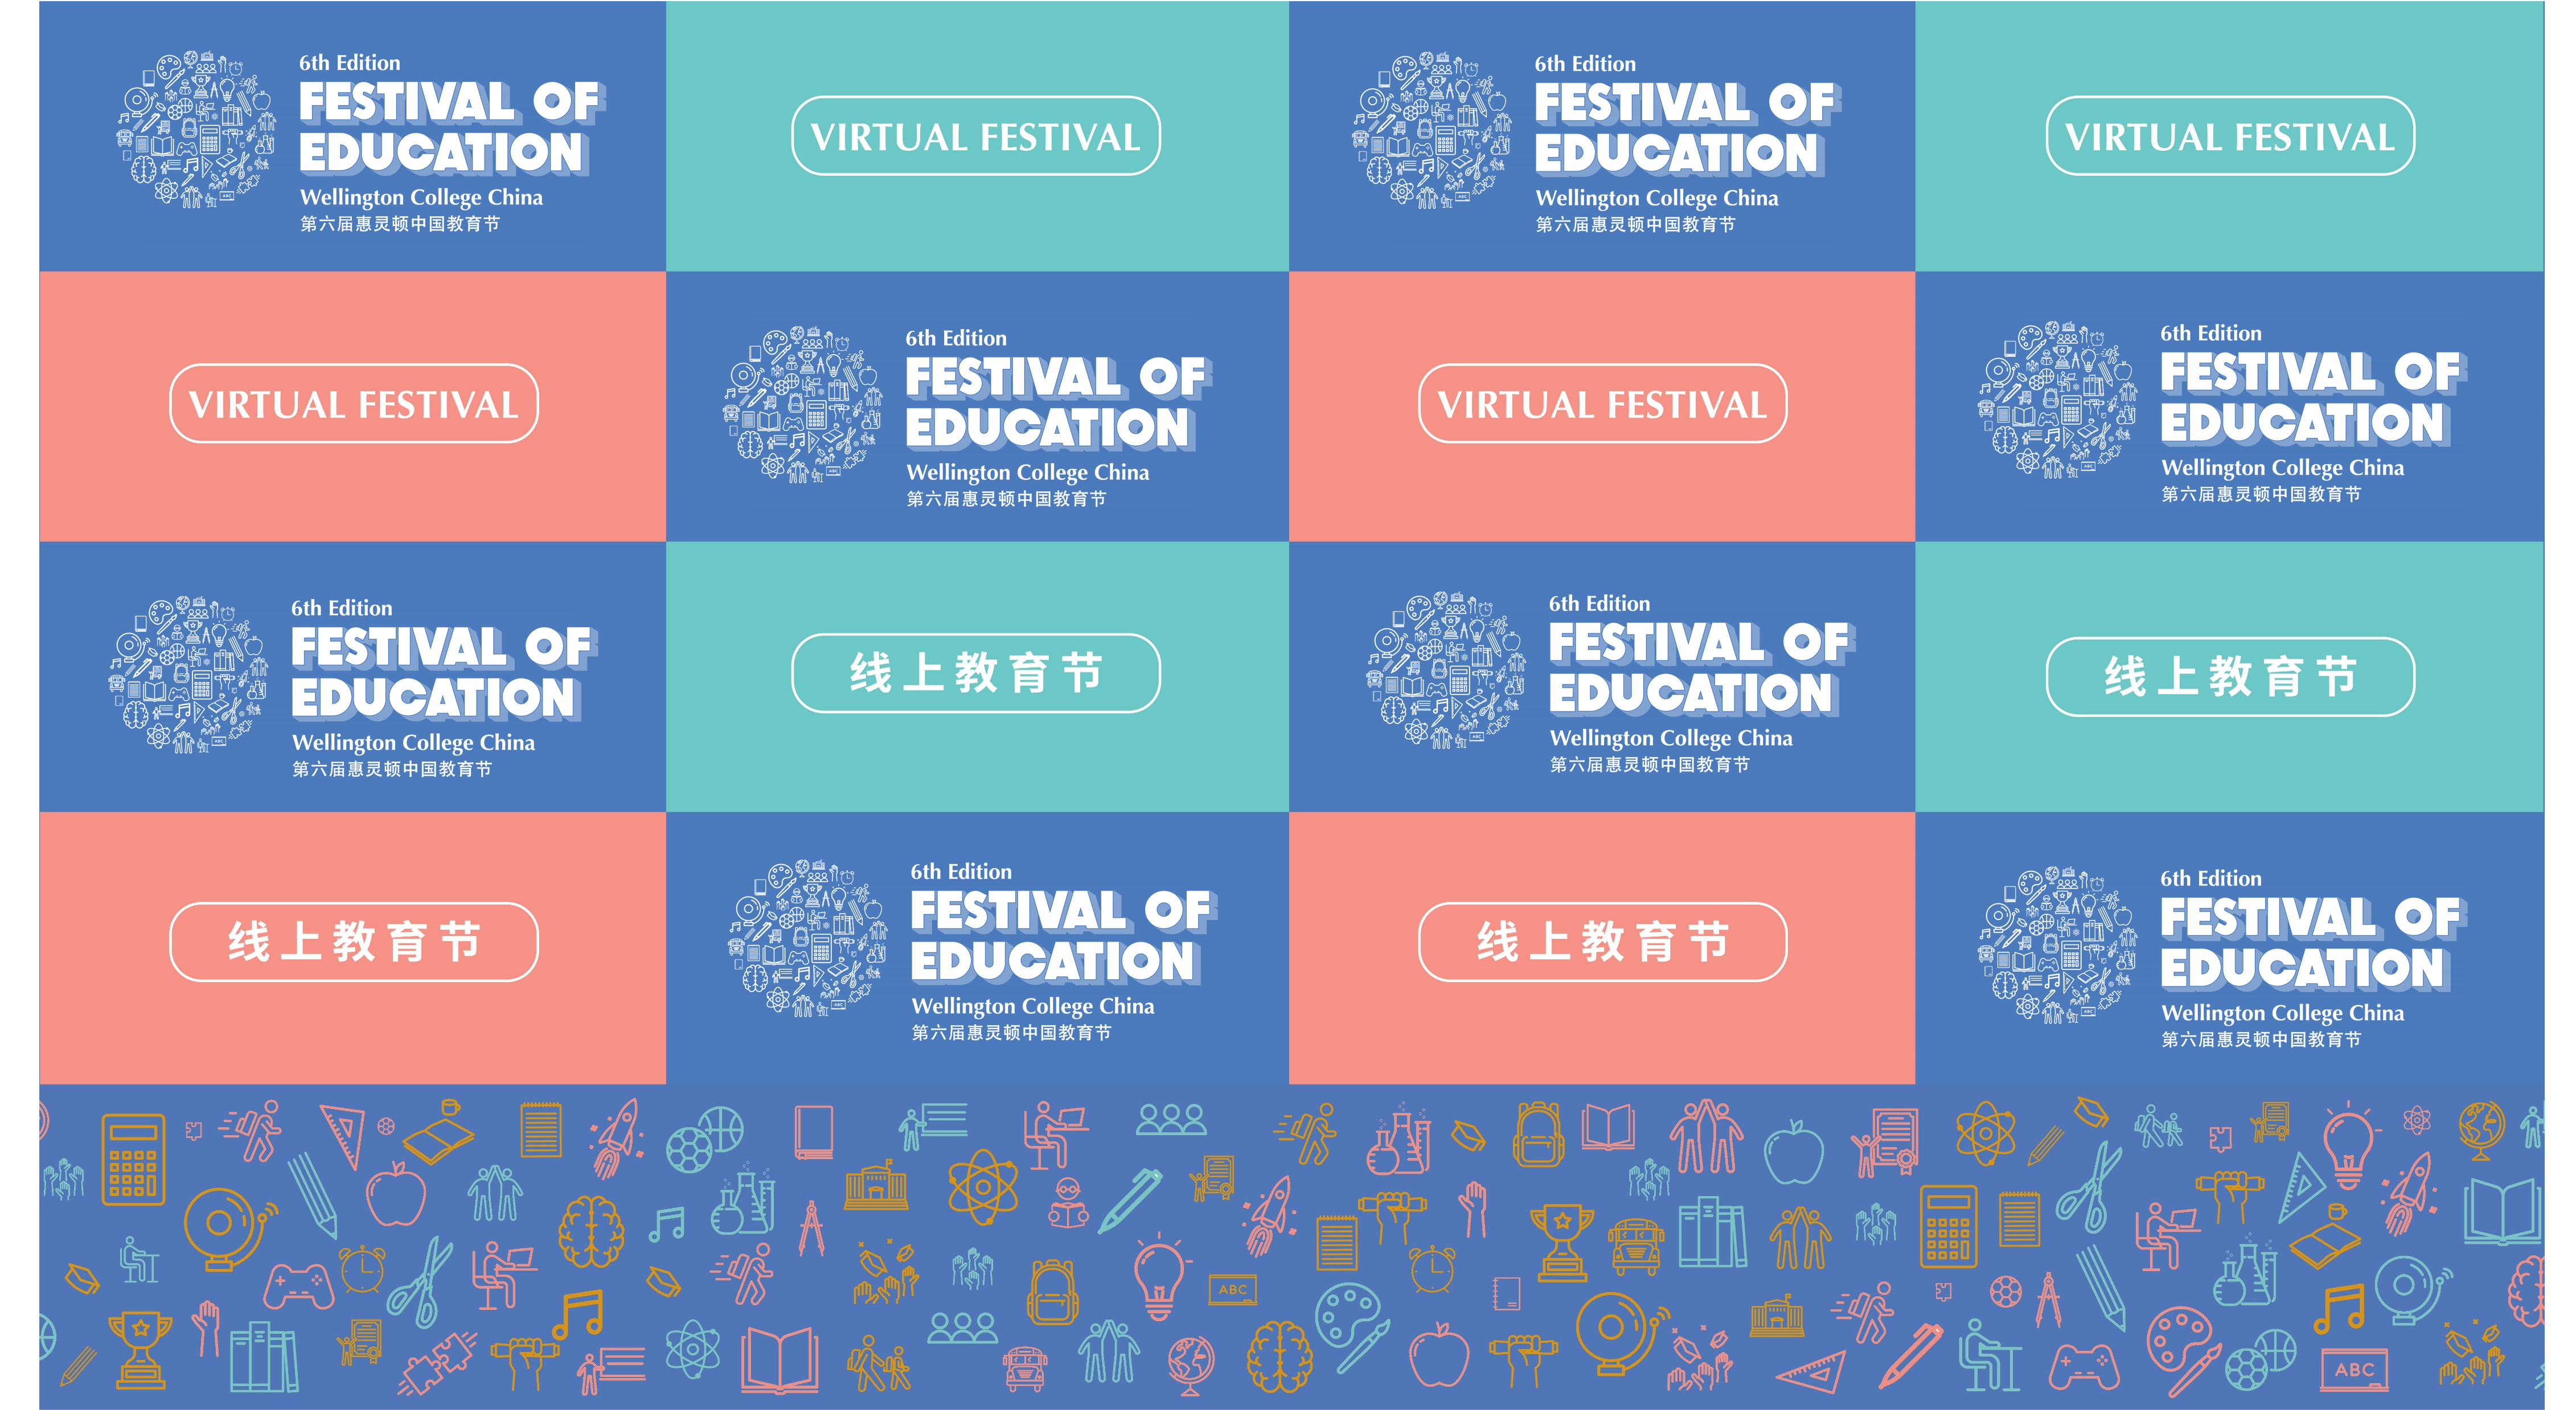 Registration is now open for our virtual EdFest